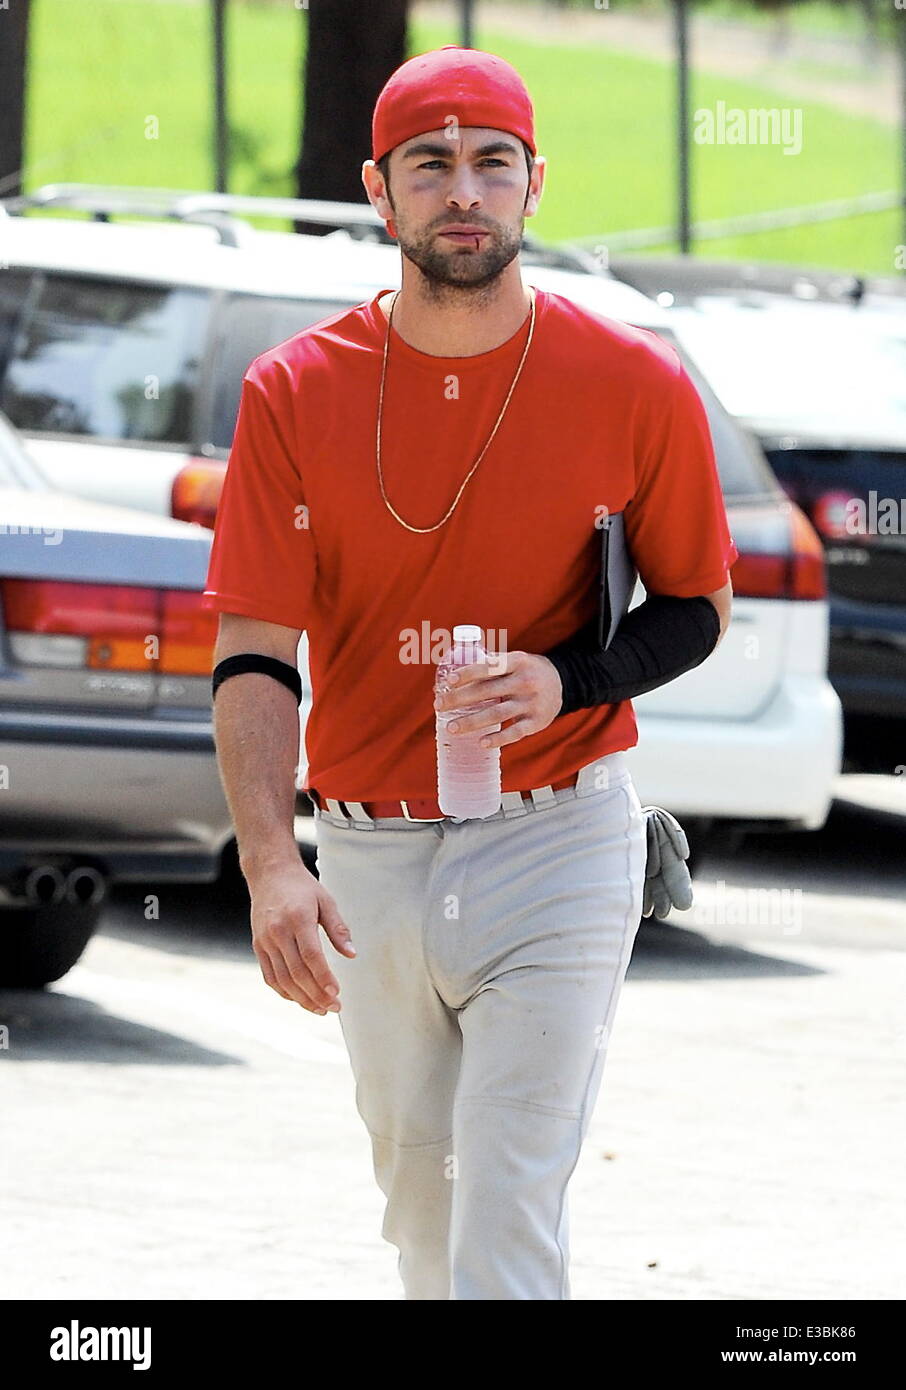 Actor Chace Crawford jumping around on the set of 'Undrafted' as he celebrates a win with his baseball team filming in La Crescenta Ca.  Featuring: Chace Crawford Where: La Crescenta, CA, United States When: 20 Sep 2013 Stock Photo